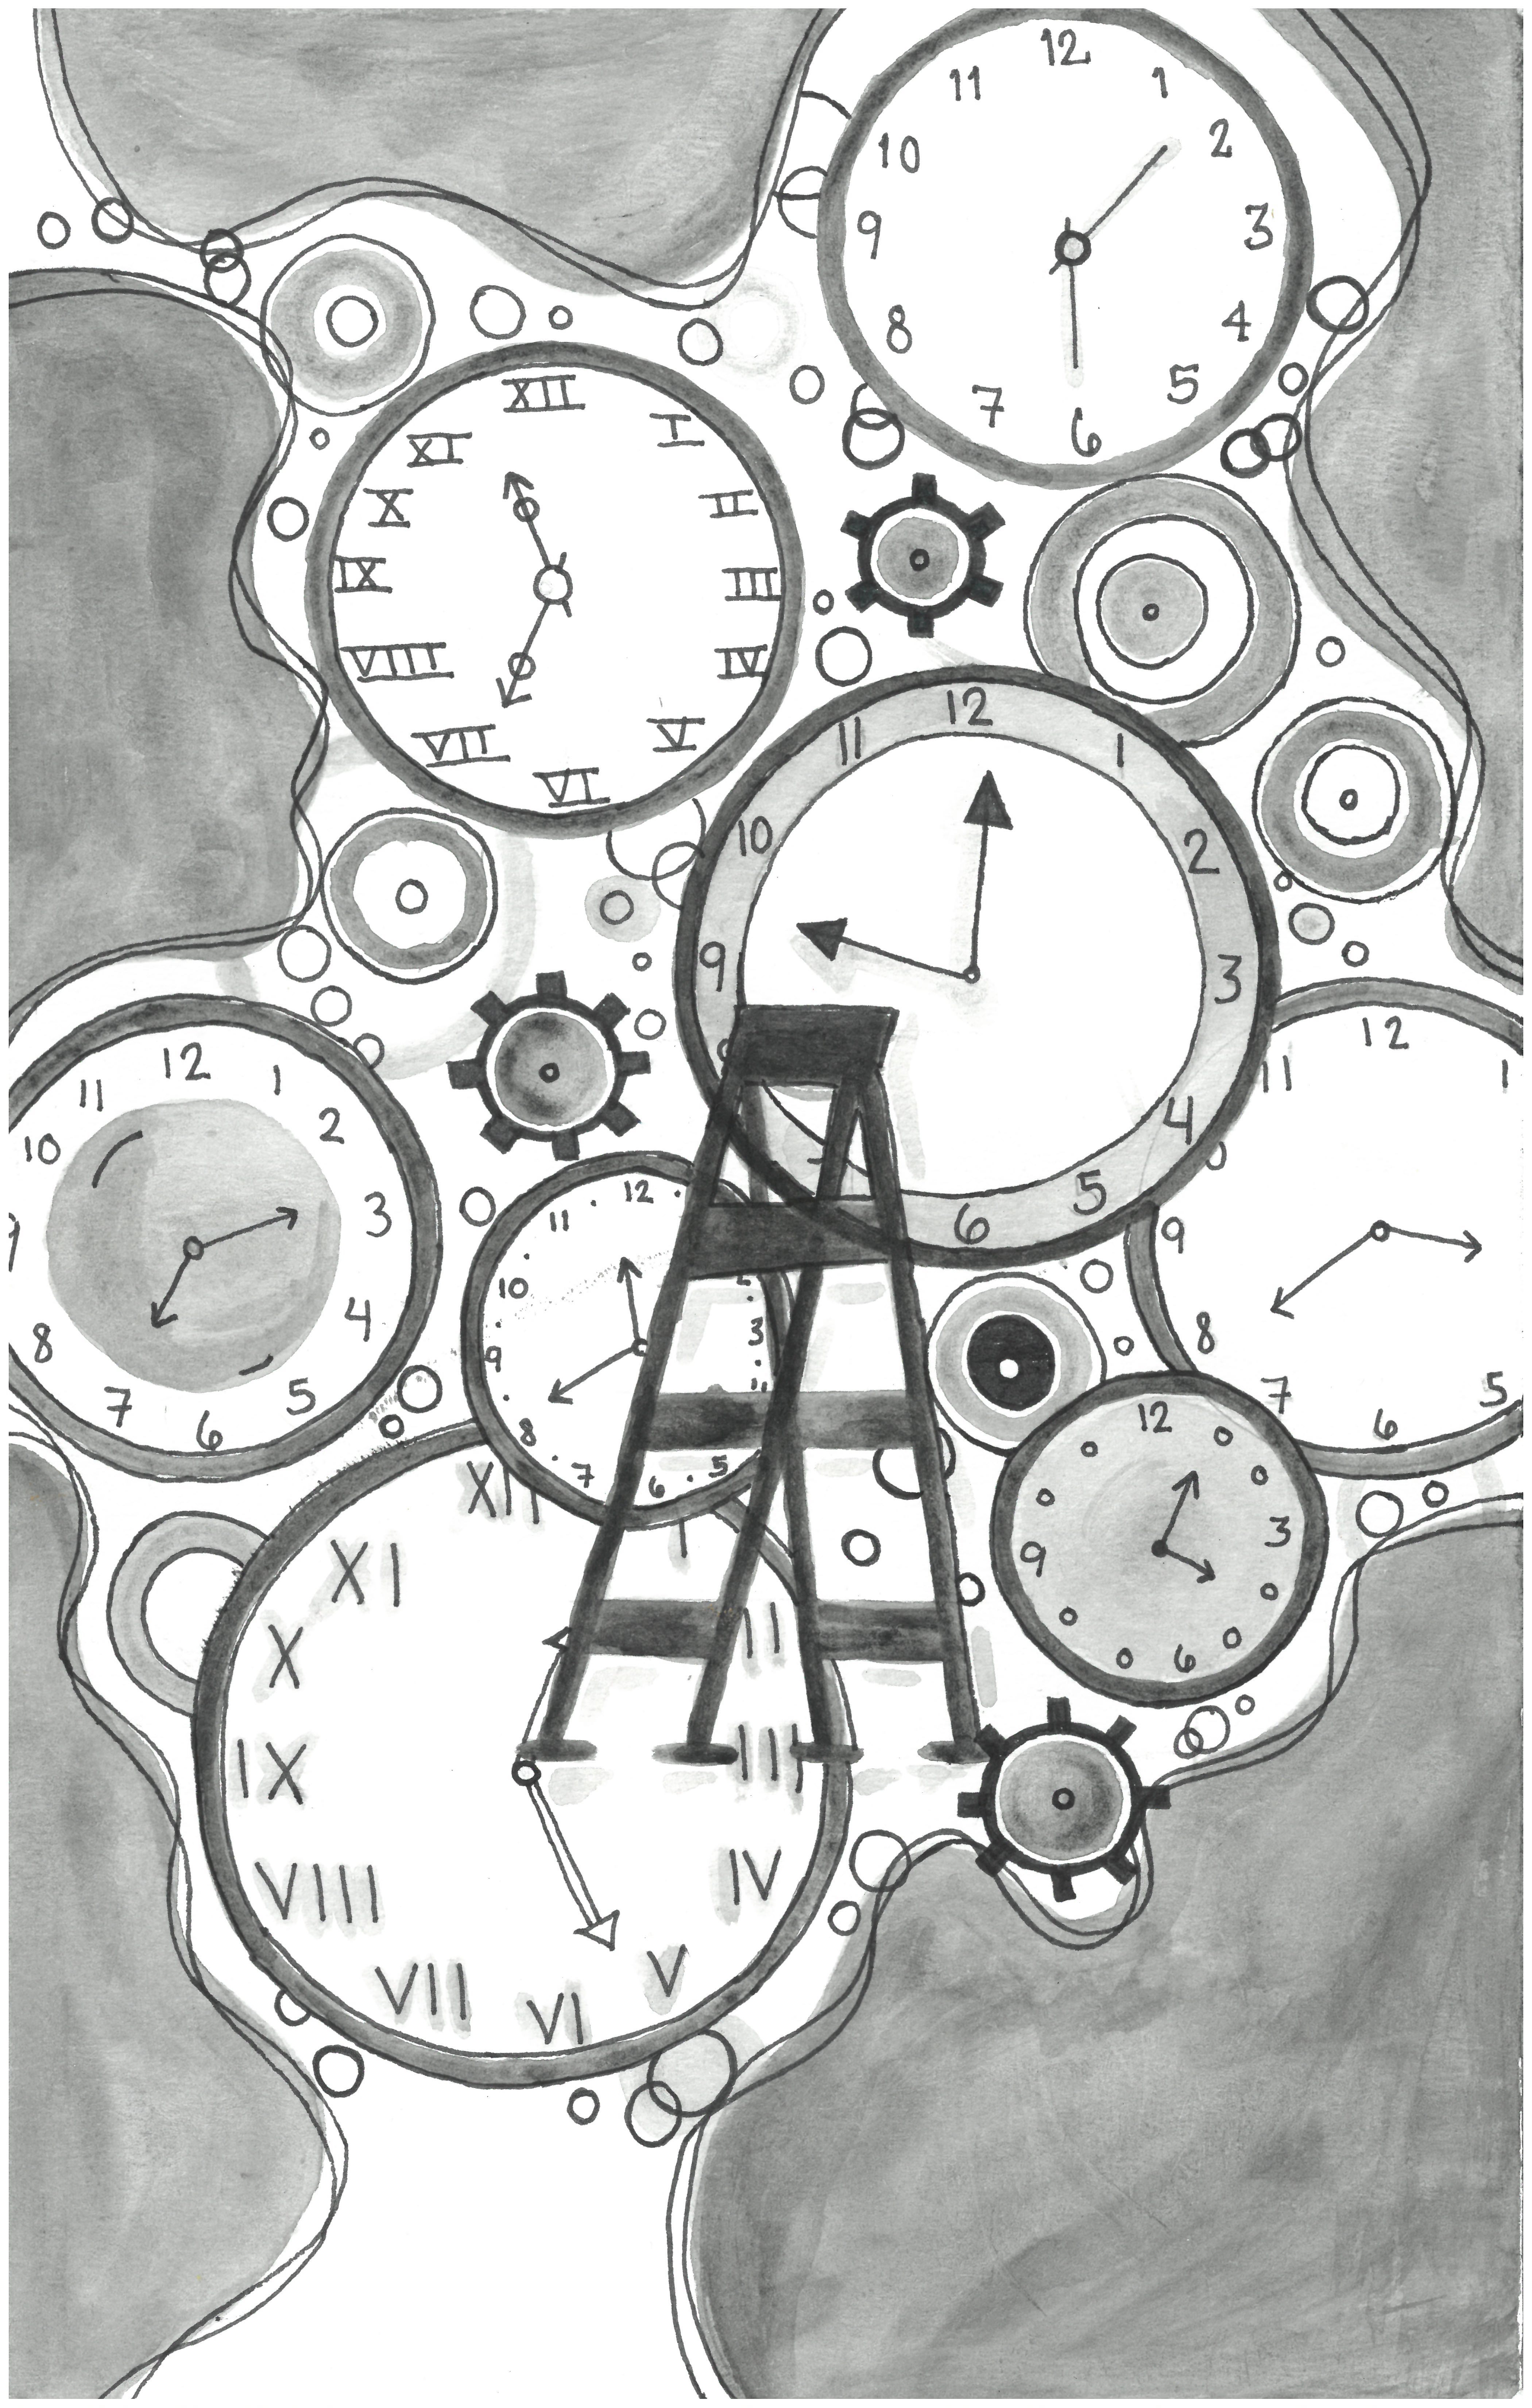 Image is an abstract drawing in pencil of various clocks in a strange, blobby shape.